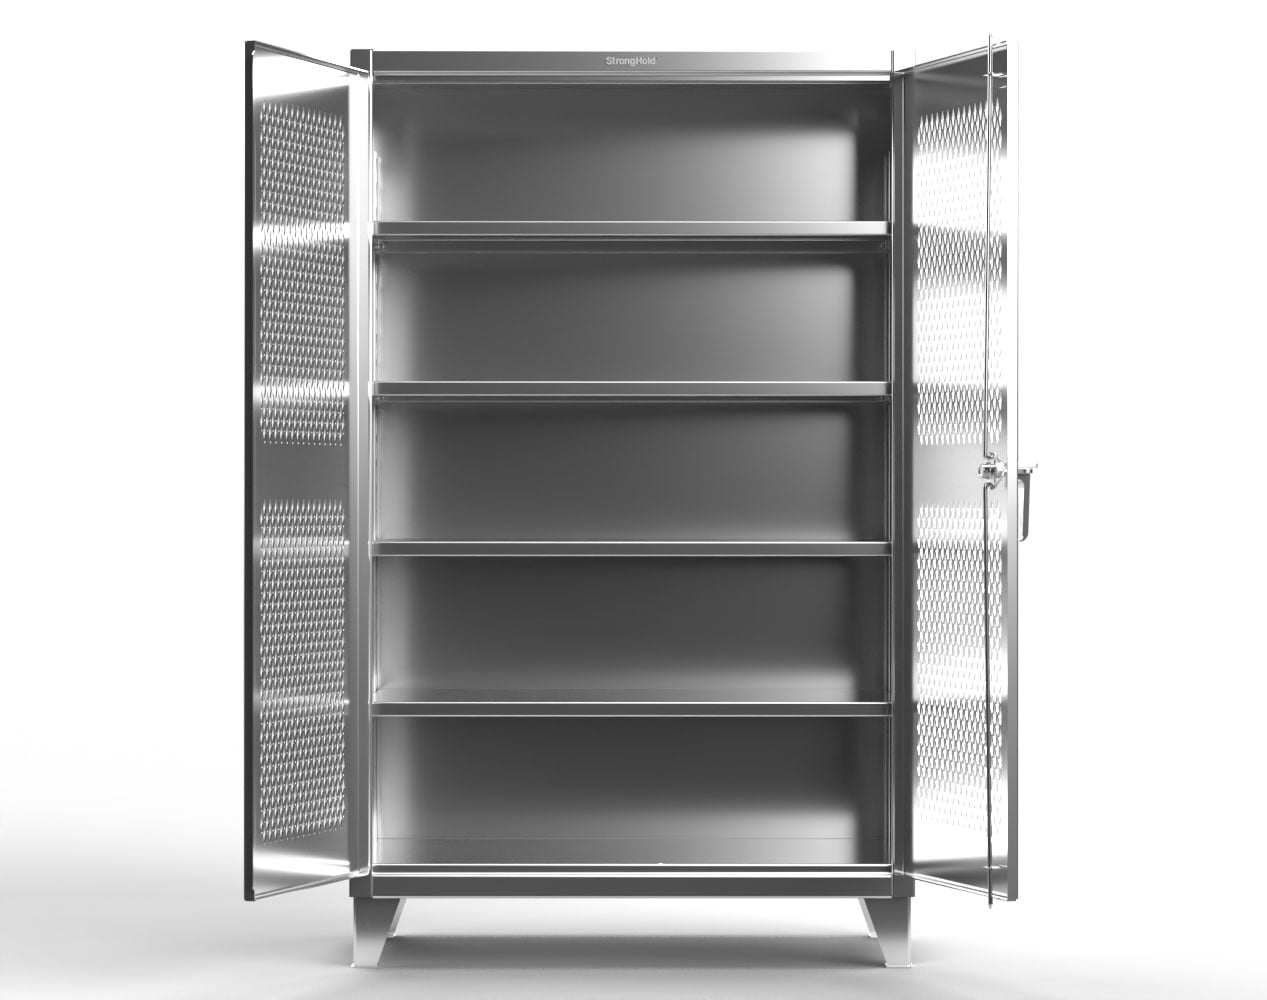 Extreme Duty 12 GA Stainless Steel Cabinet with Ventilated Doors, 4 Shelves - 60 In. W x 24 In. D x 78 In. H